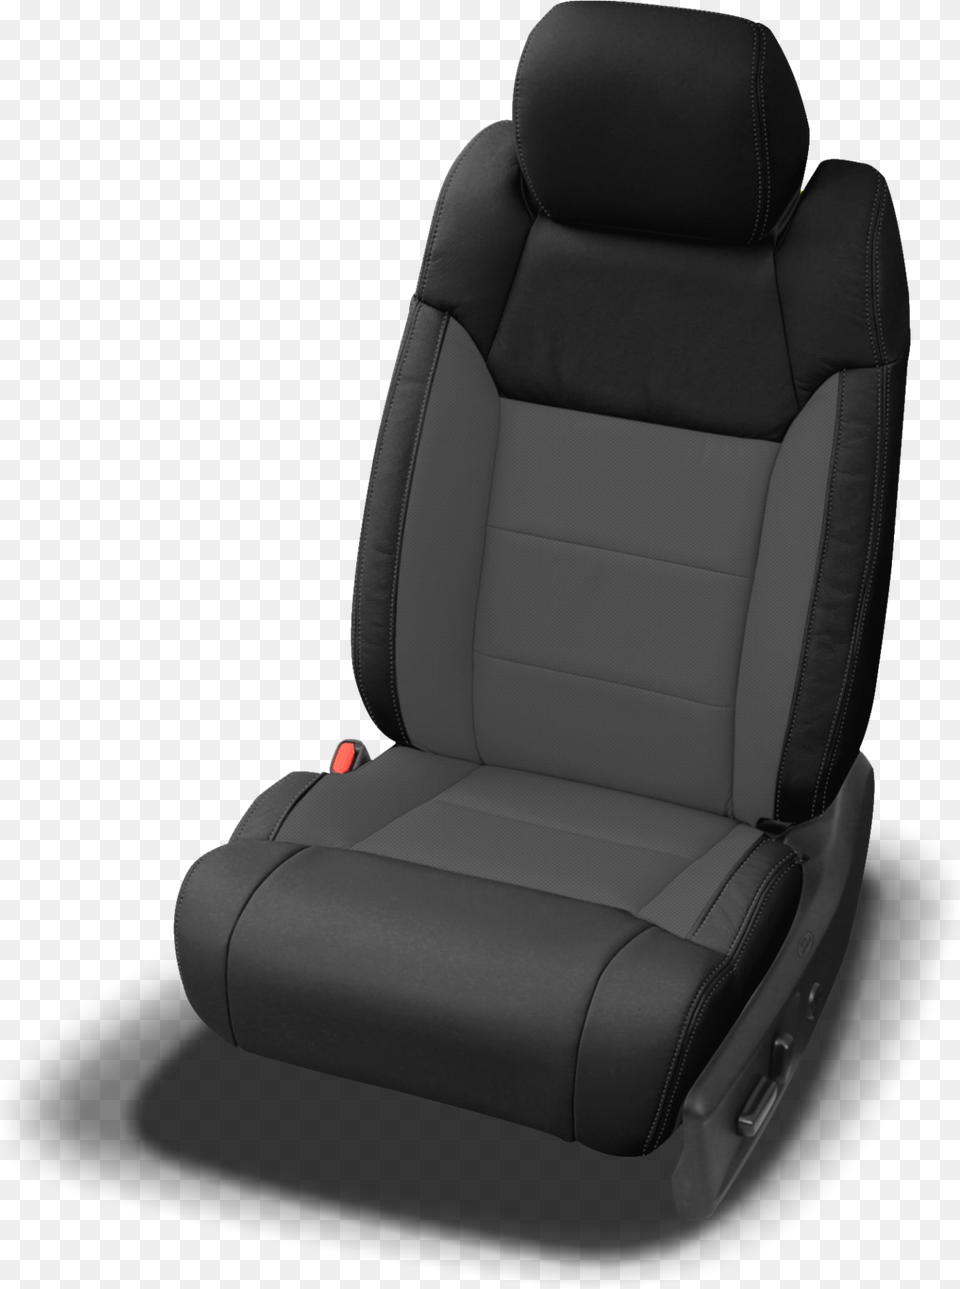 Leather Seat Clipart Car Seat Hd, Chair, Furniture, Transportation, Vehicle Png